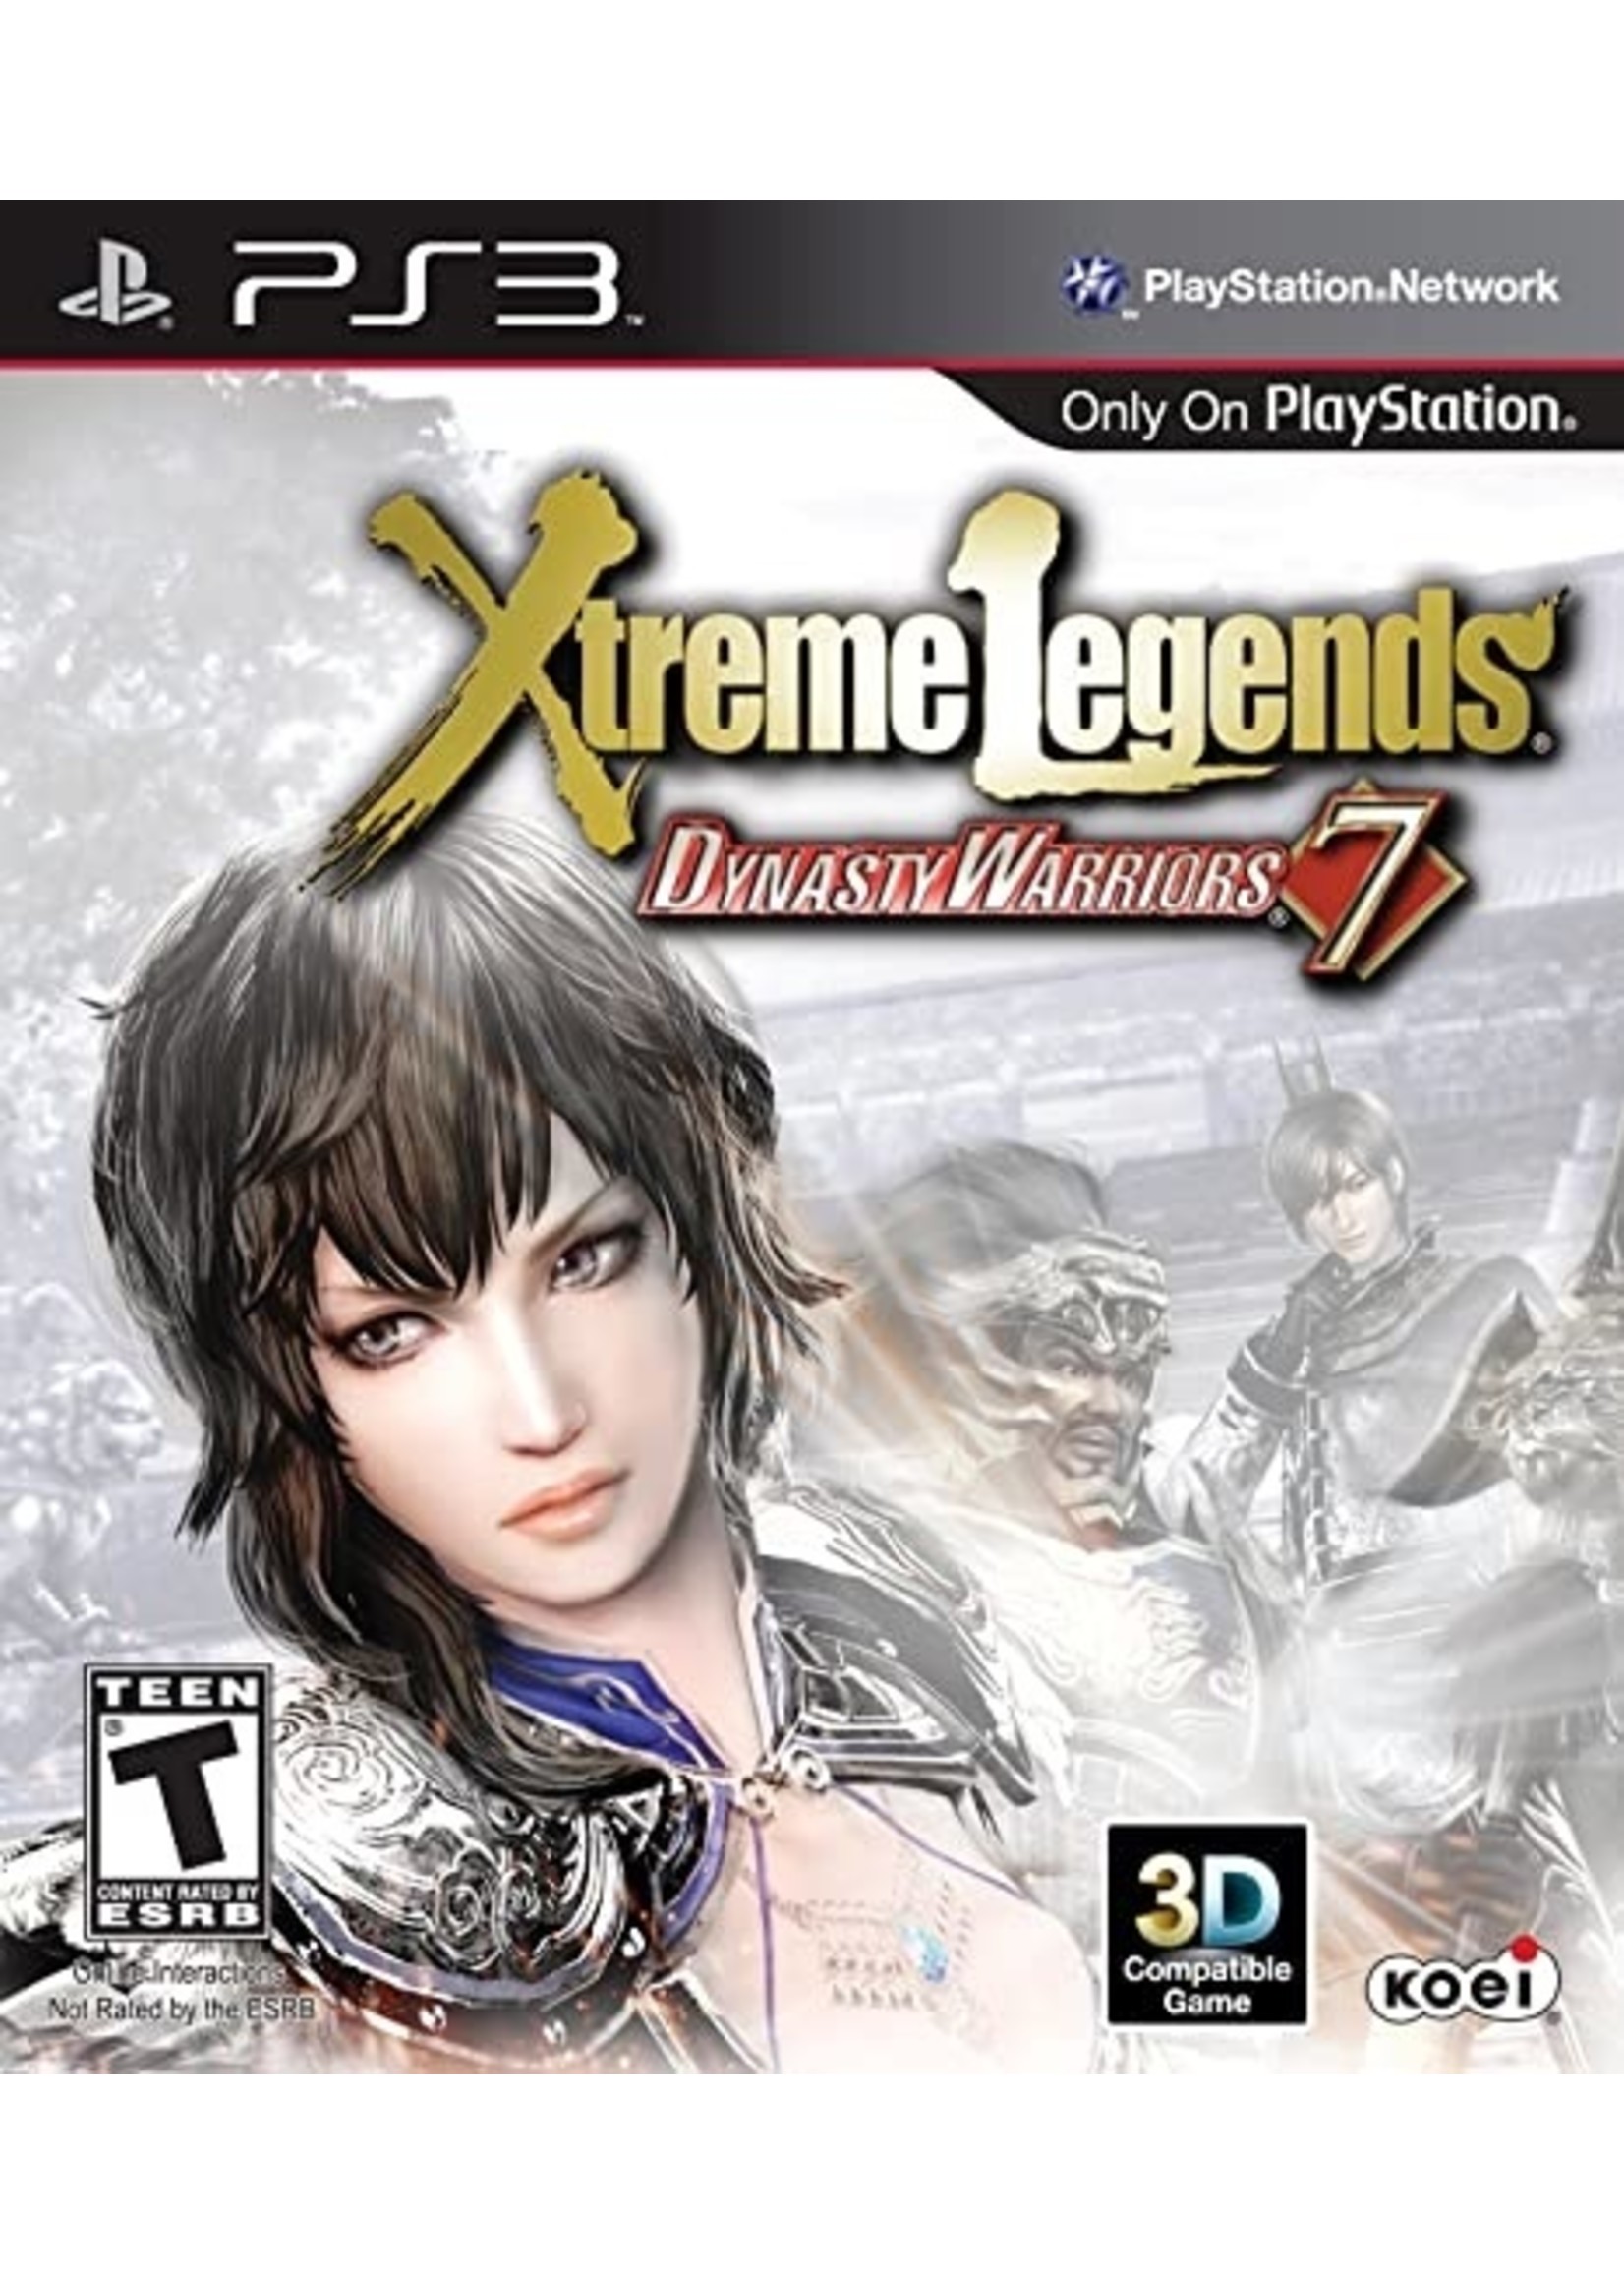 Sony Playstation 3 (PS3) Xtreme Legends - Dynasty Warriors 7